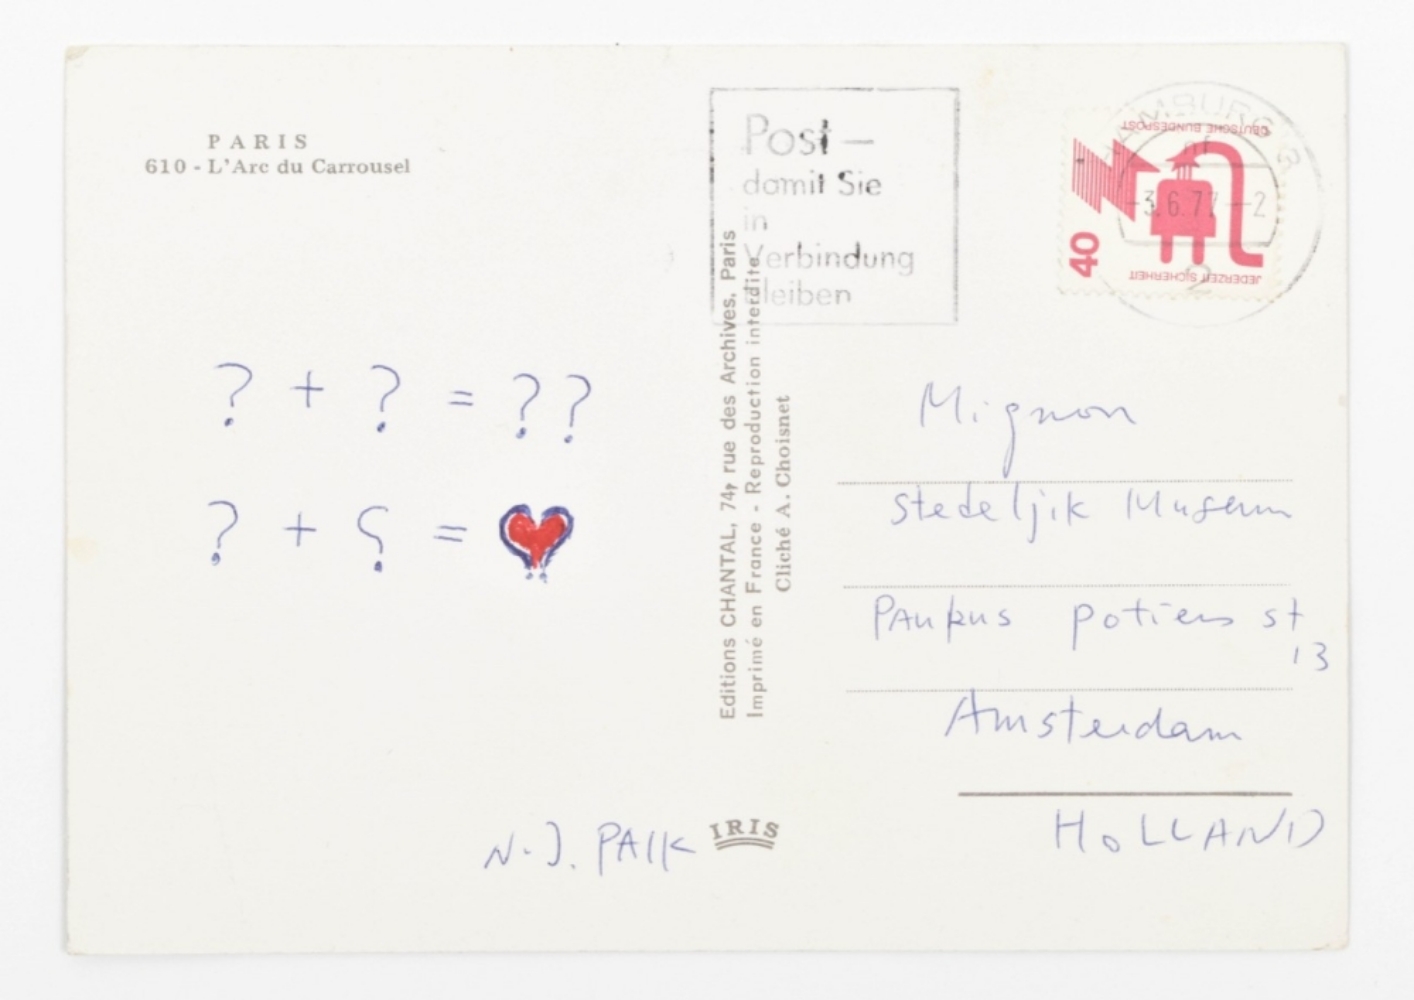 Nam June Paik ephemera from the collection of Dorine Mignot and Wim Beeren - Image 3 of 9